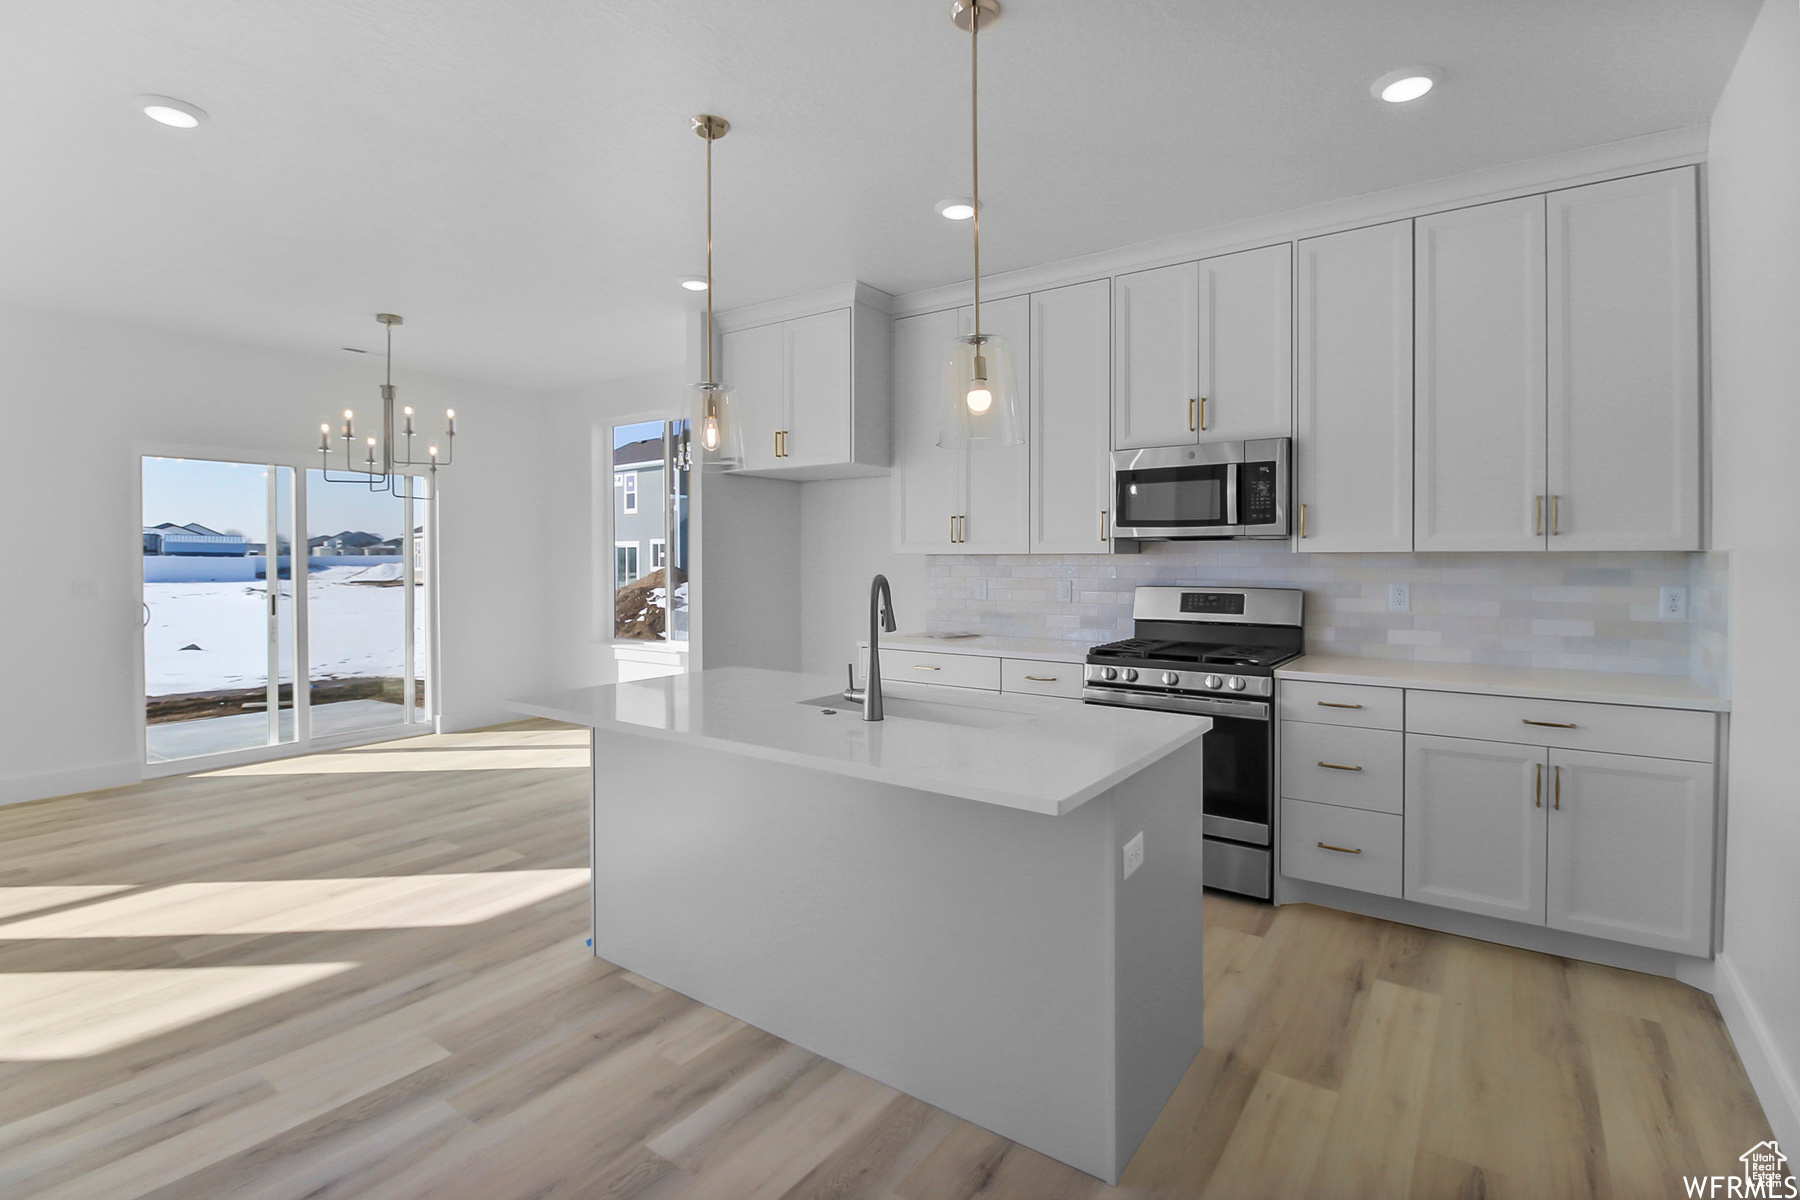 Kitchen featuring backsplash, appliances with stainless steel finishes, sink, and light wood-type flooring